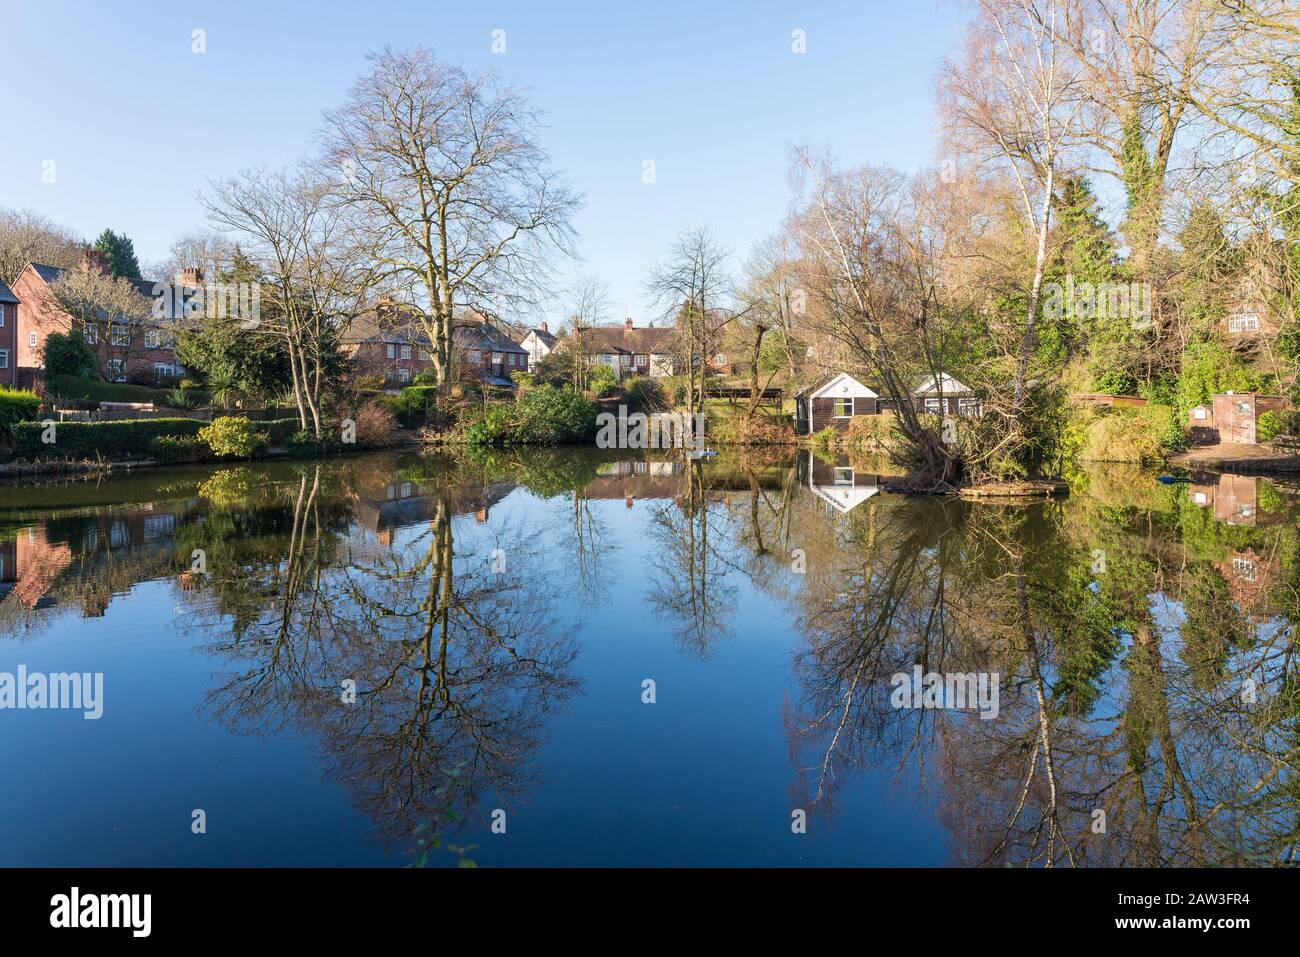 The pool at the centre of the Moor Pool Estate which is a garden suburb in Harborne, Birmingham and is a conservation area. Stock Photo